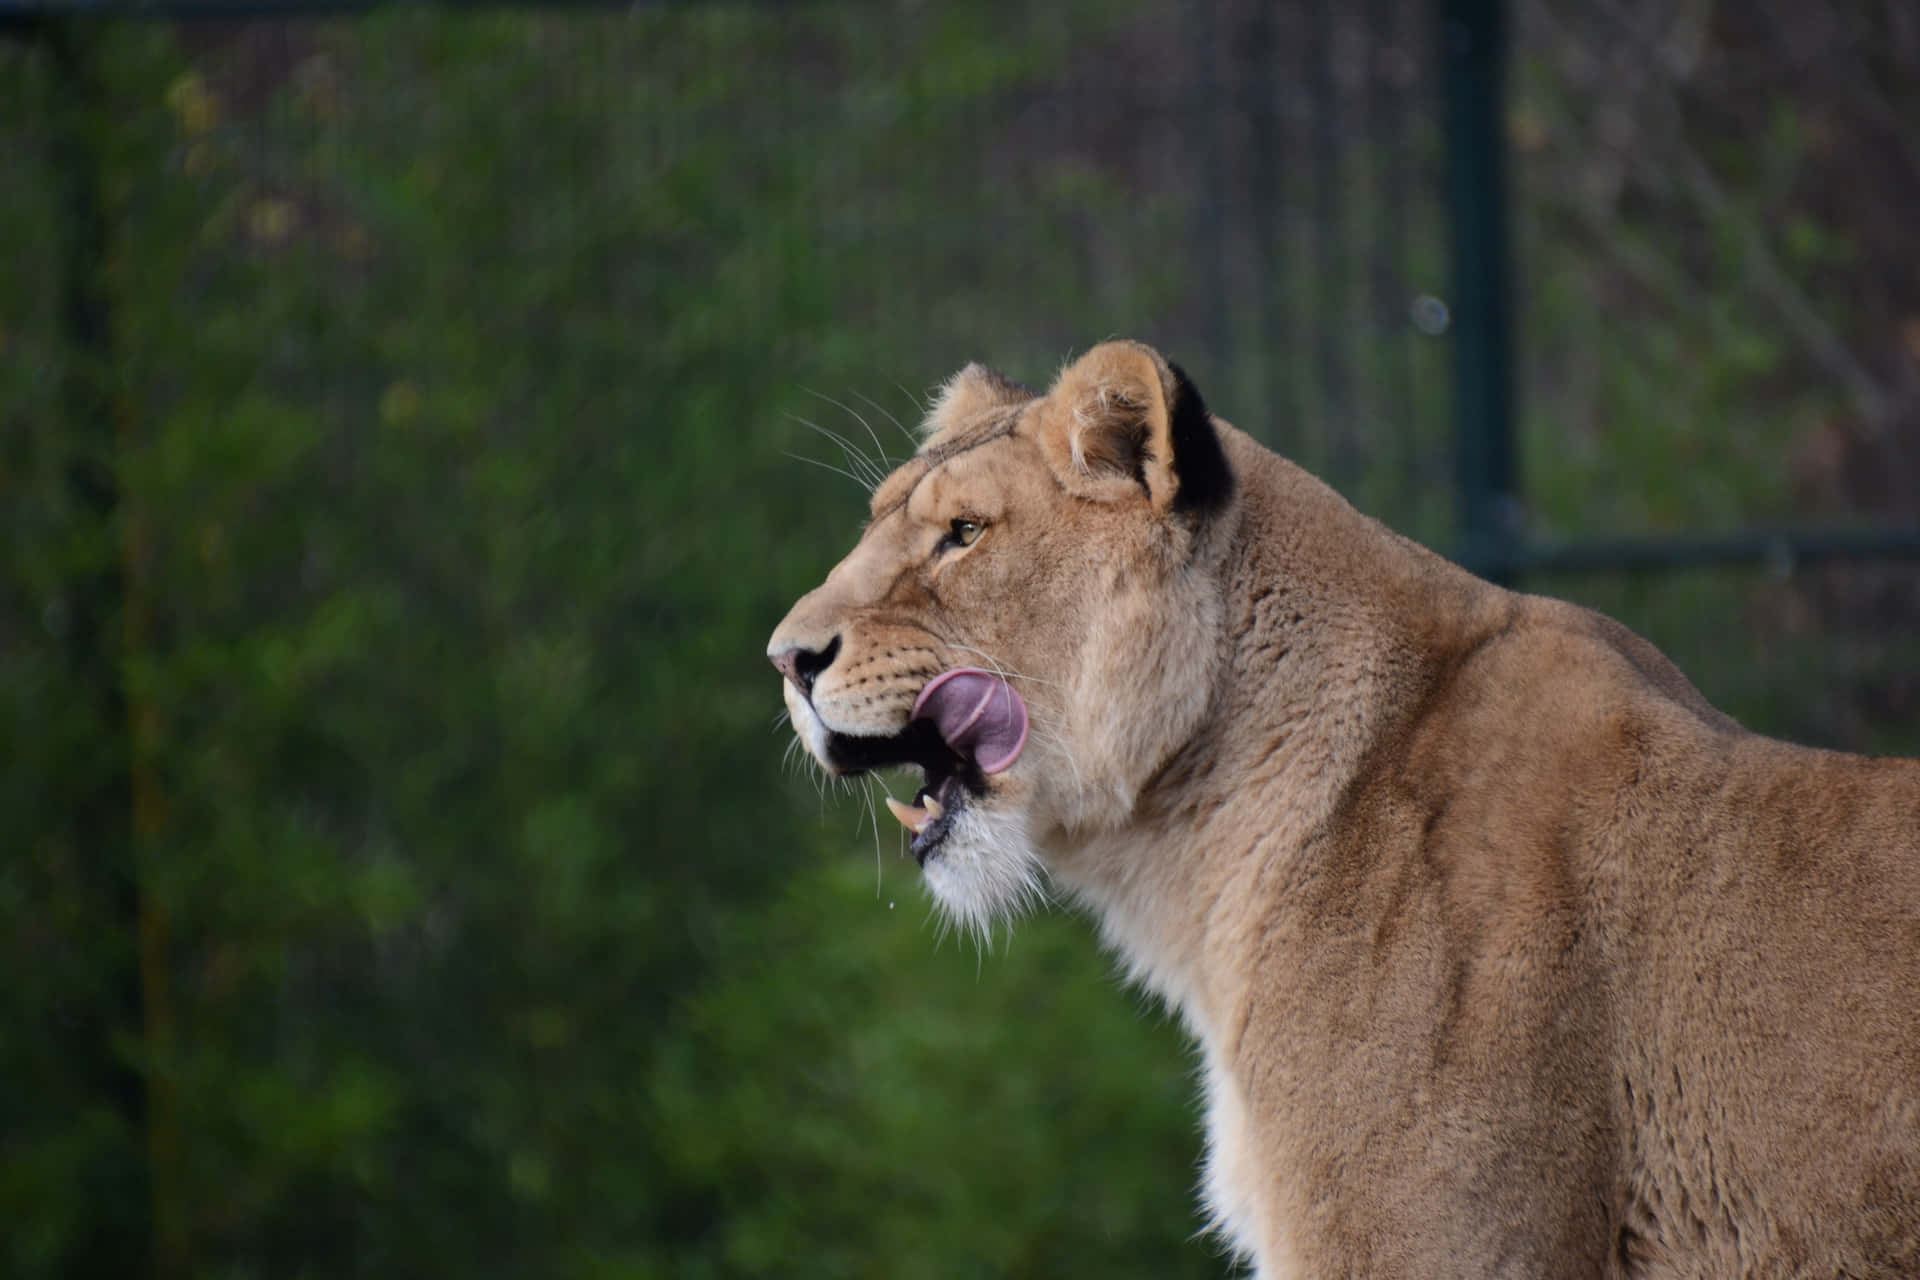 Lioness In A Zoo Cage Wallpaper